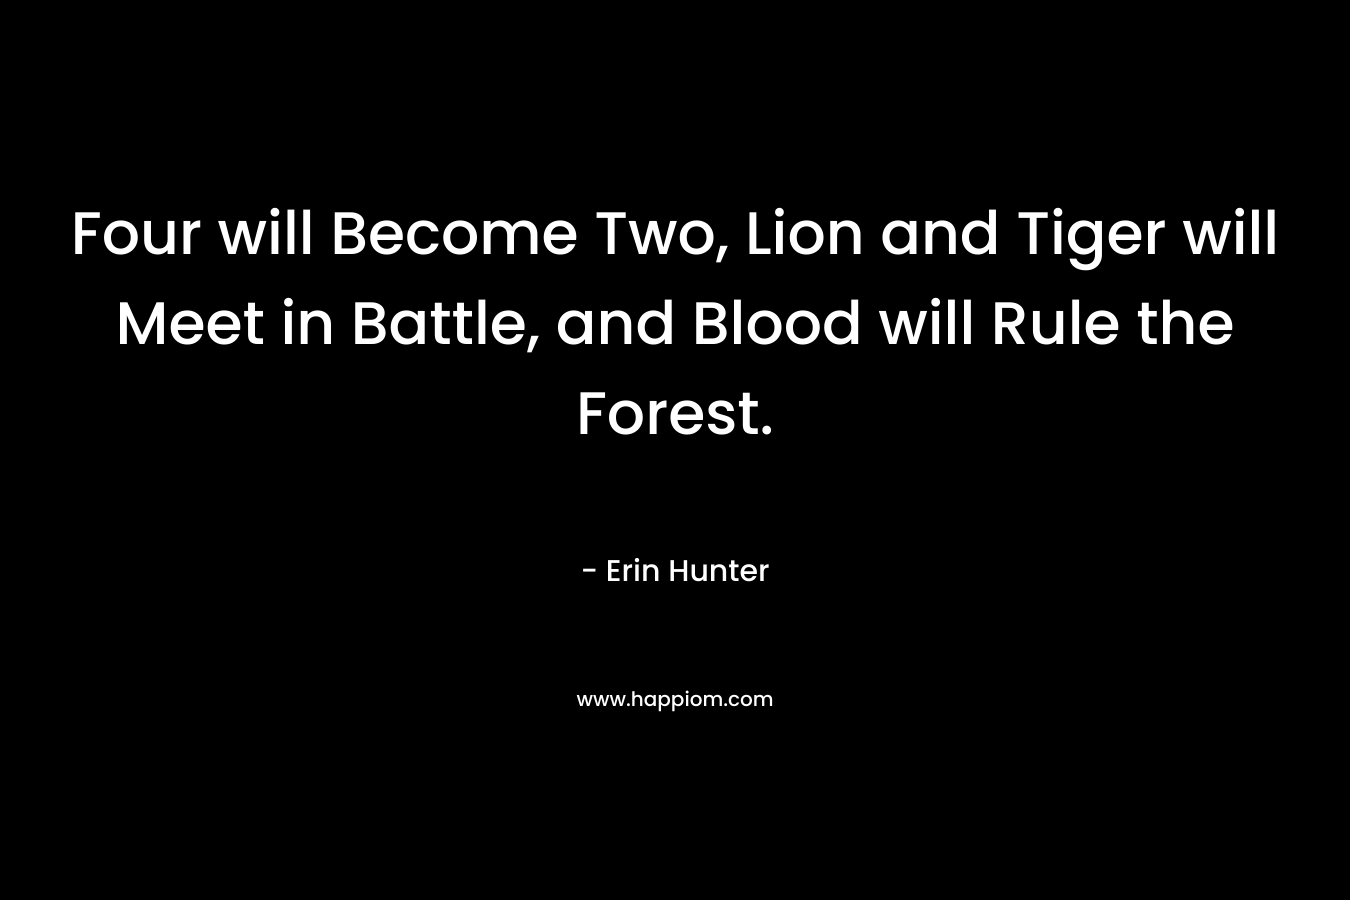 Four will Become Two, Lion and Tiger will Meet in Battle, and Blood will Rule the Forest. – Erin Hunter